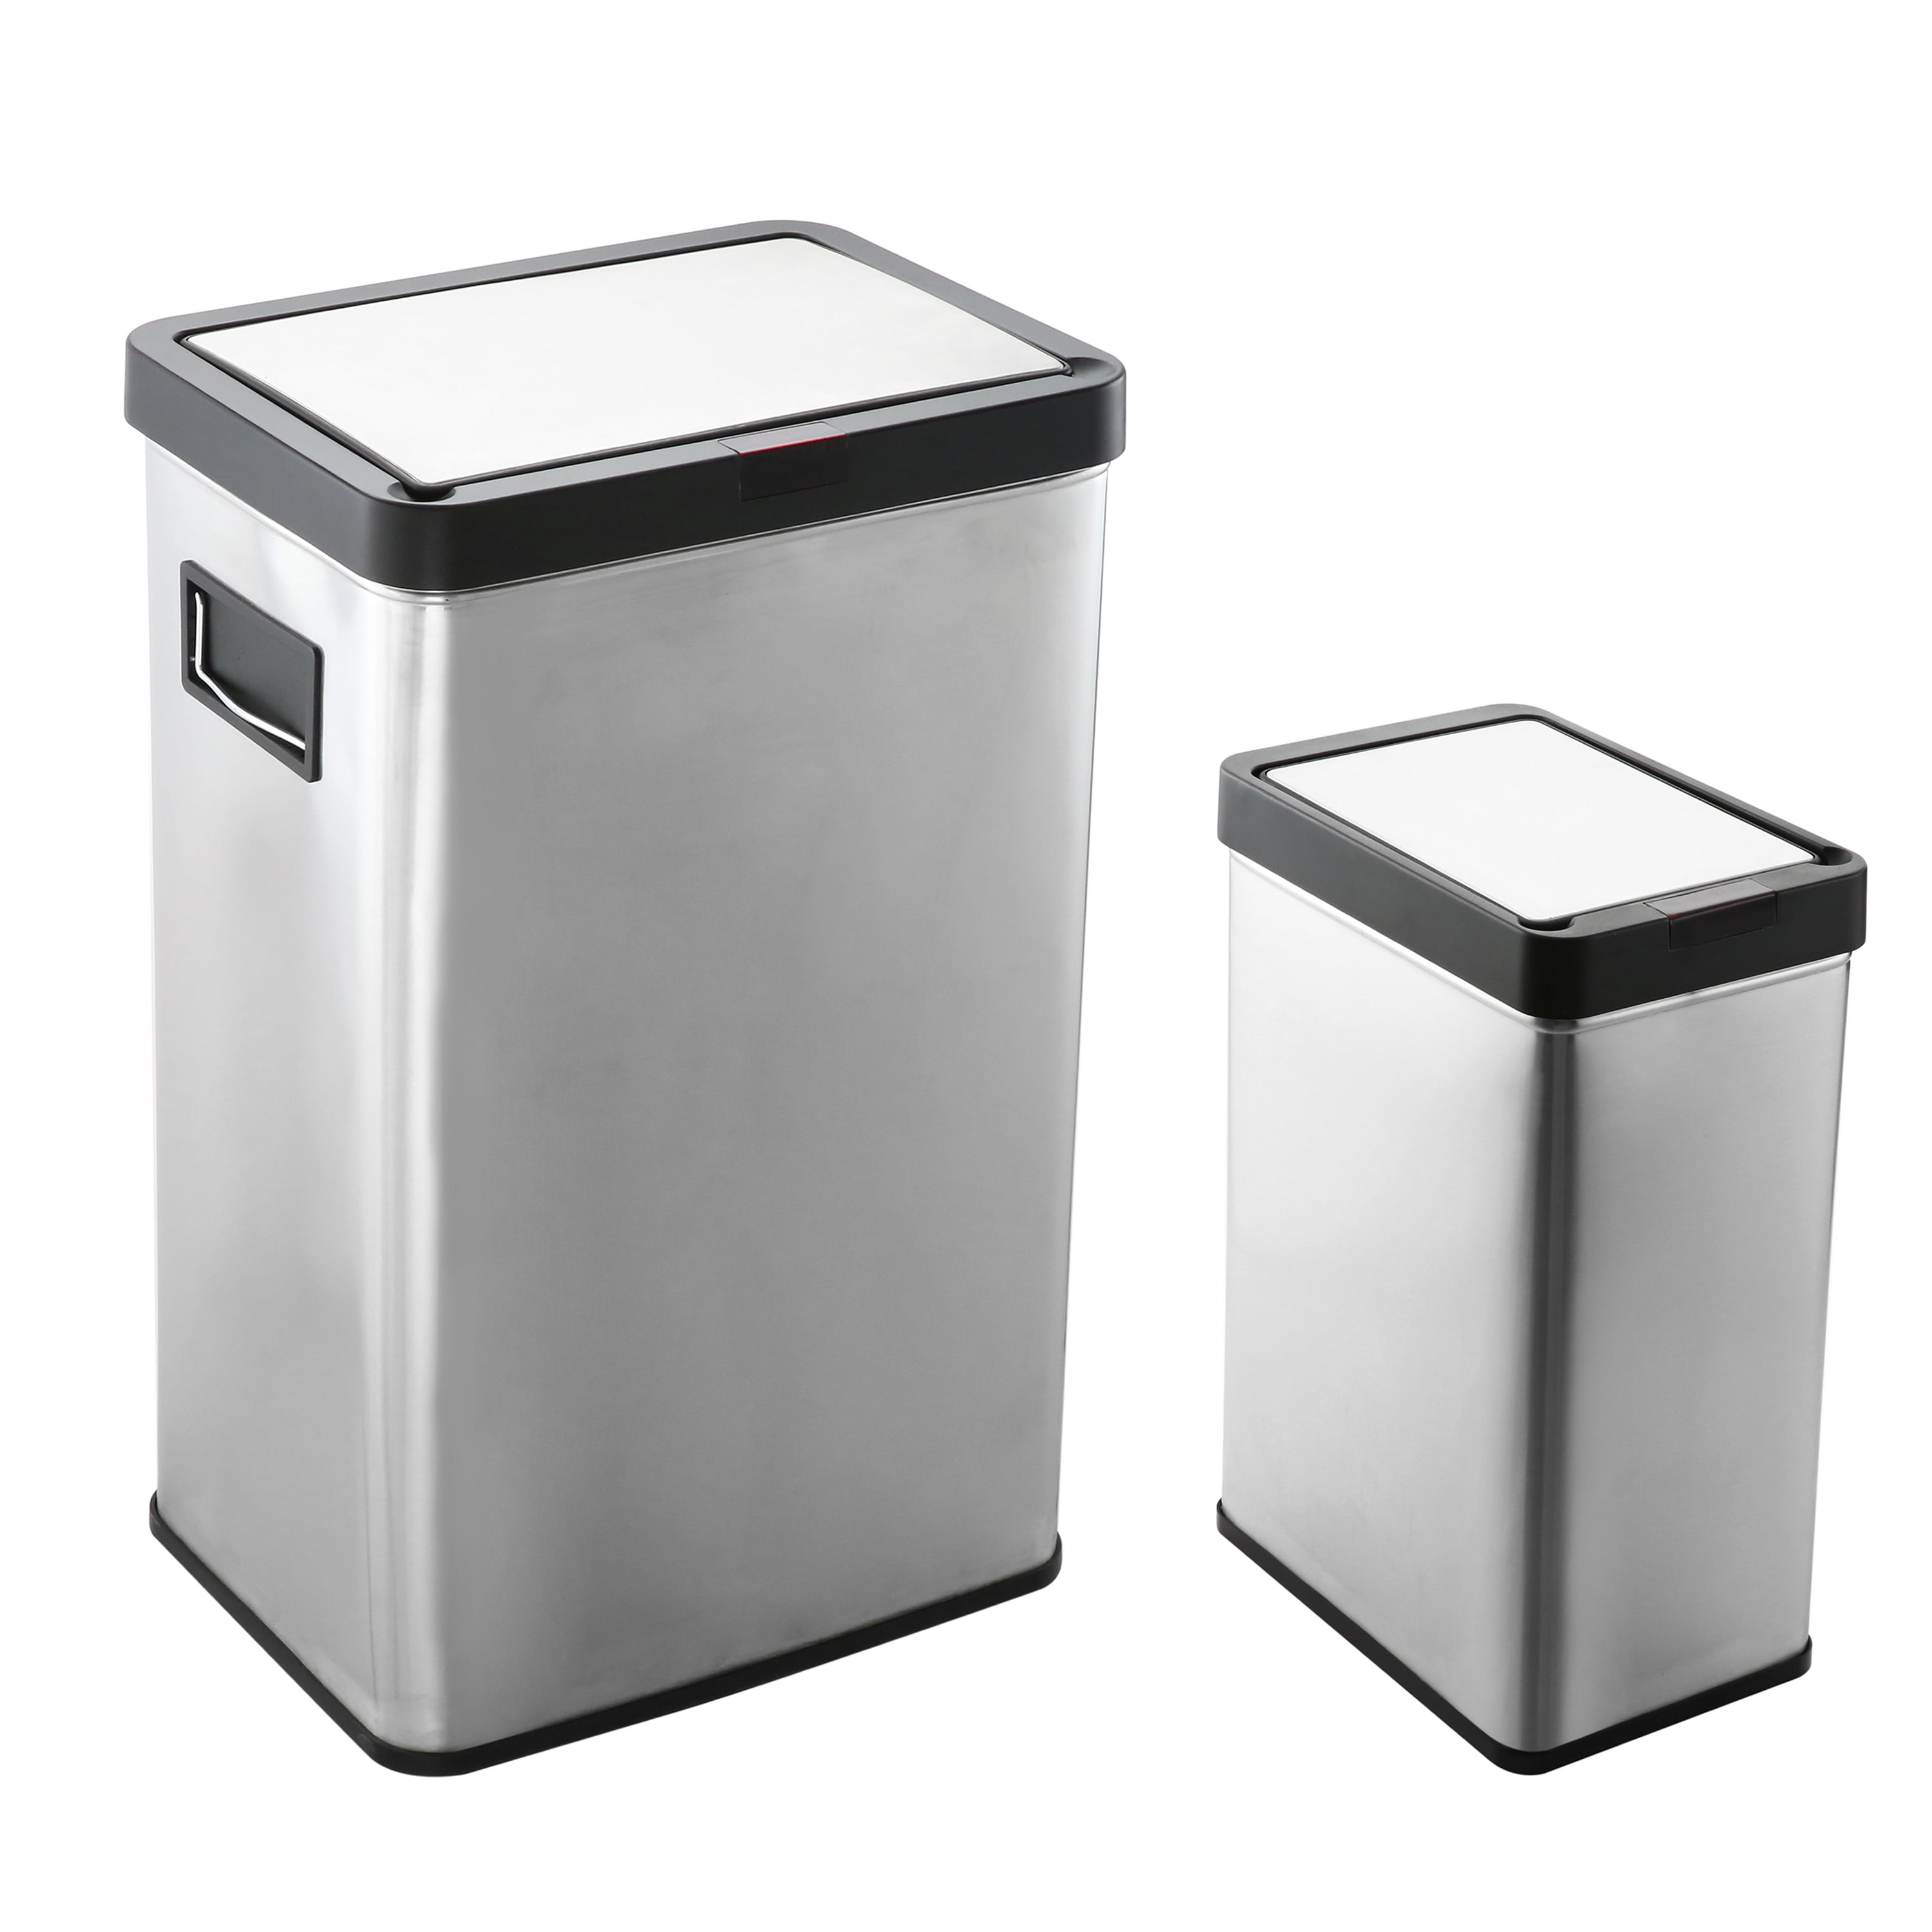 Better Homes & Gardens 3.9 Gallon Trash Stainless Steel Kitchen Trash Can  with Lid